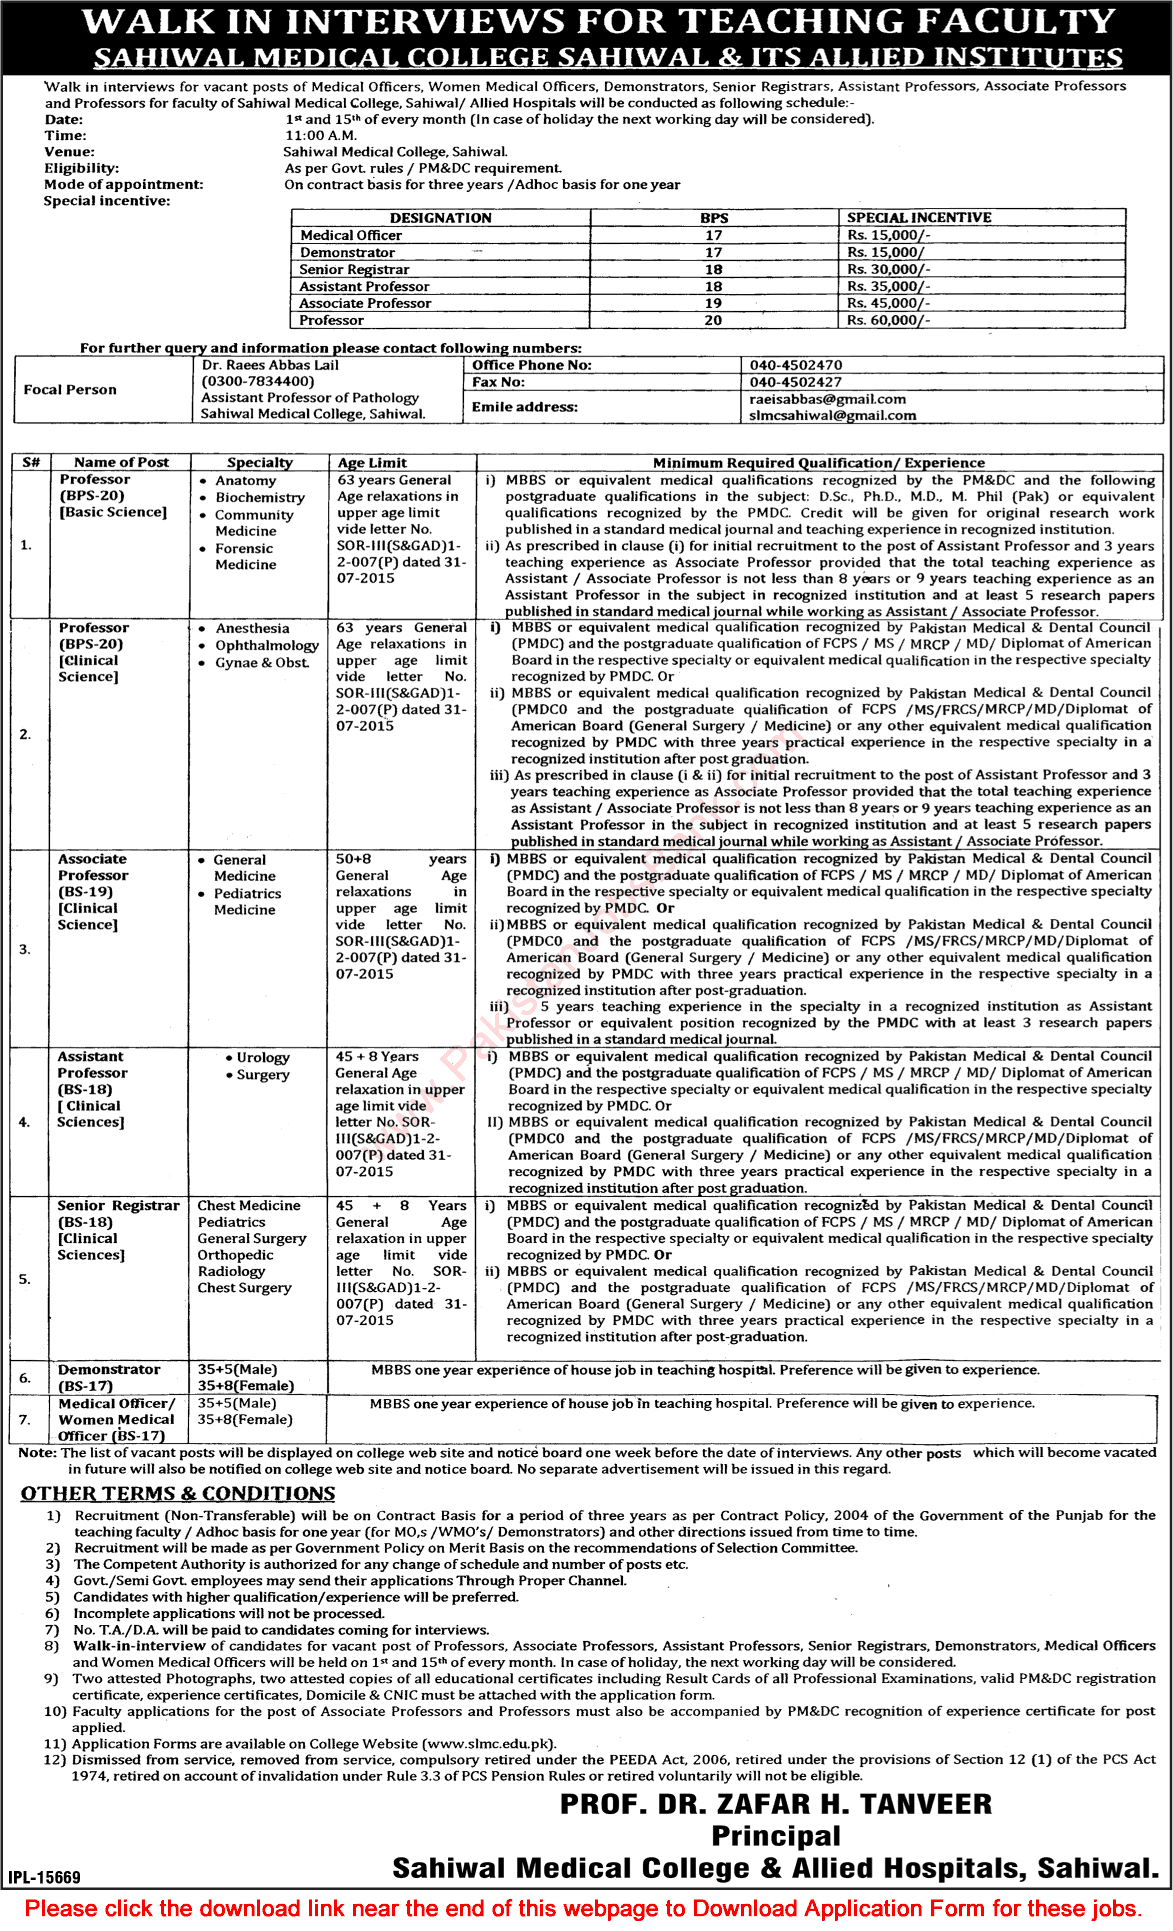 Sahiwal Medical College and Allied Hospitals Jobs 2017 Walk in Interviews Teaching Faculty & Others Latest